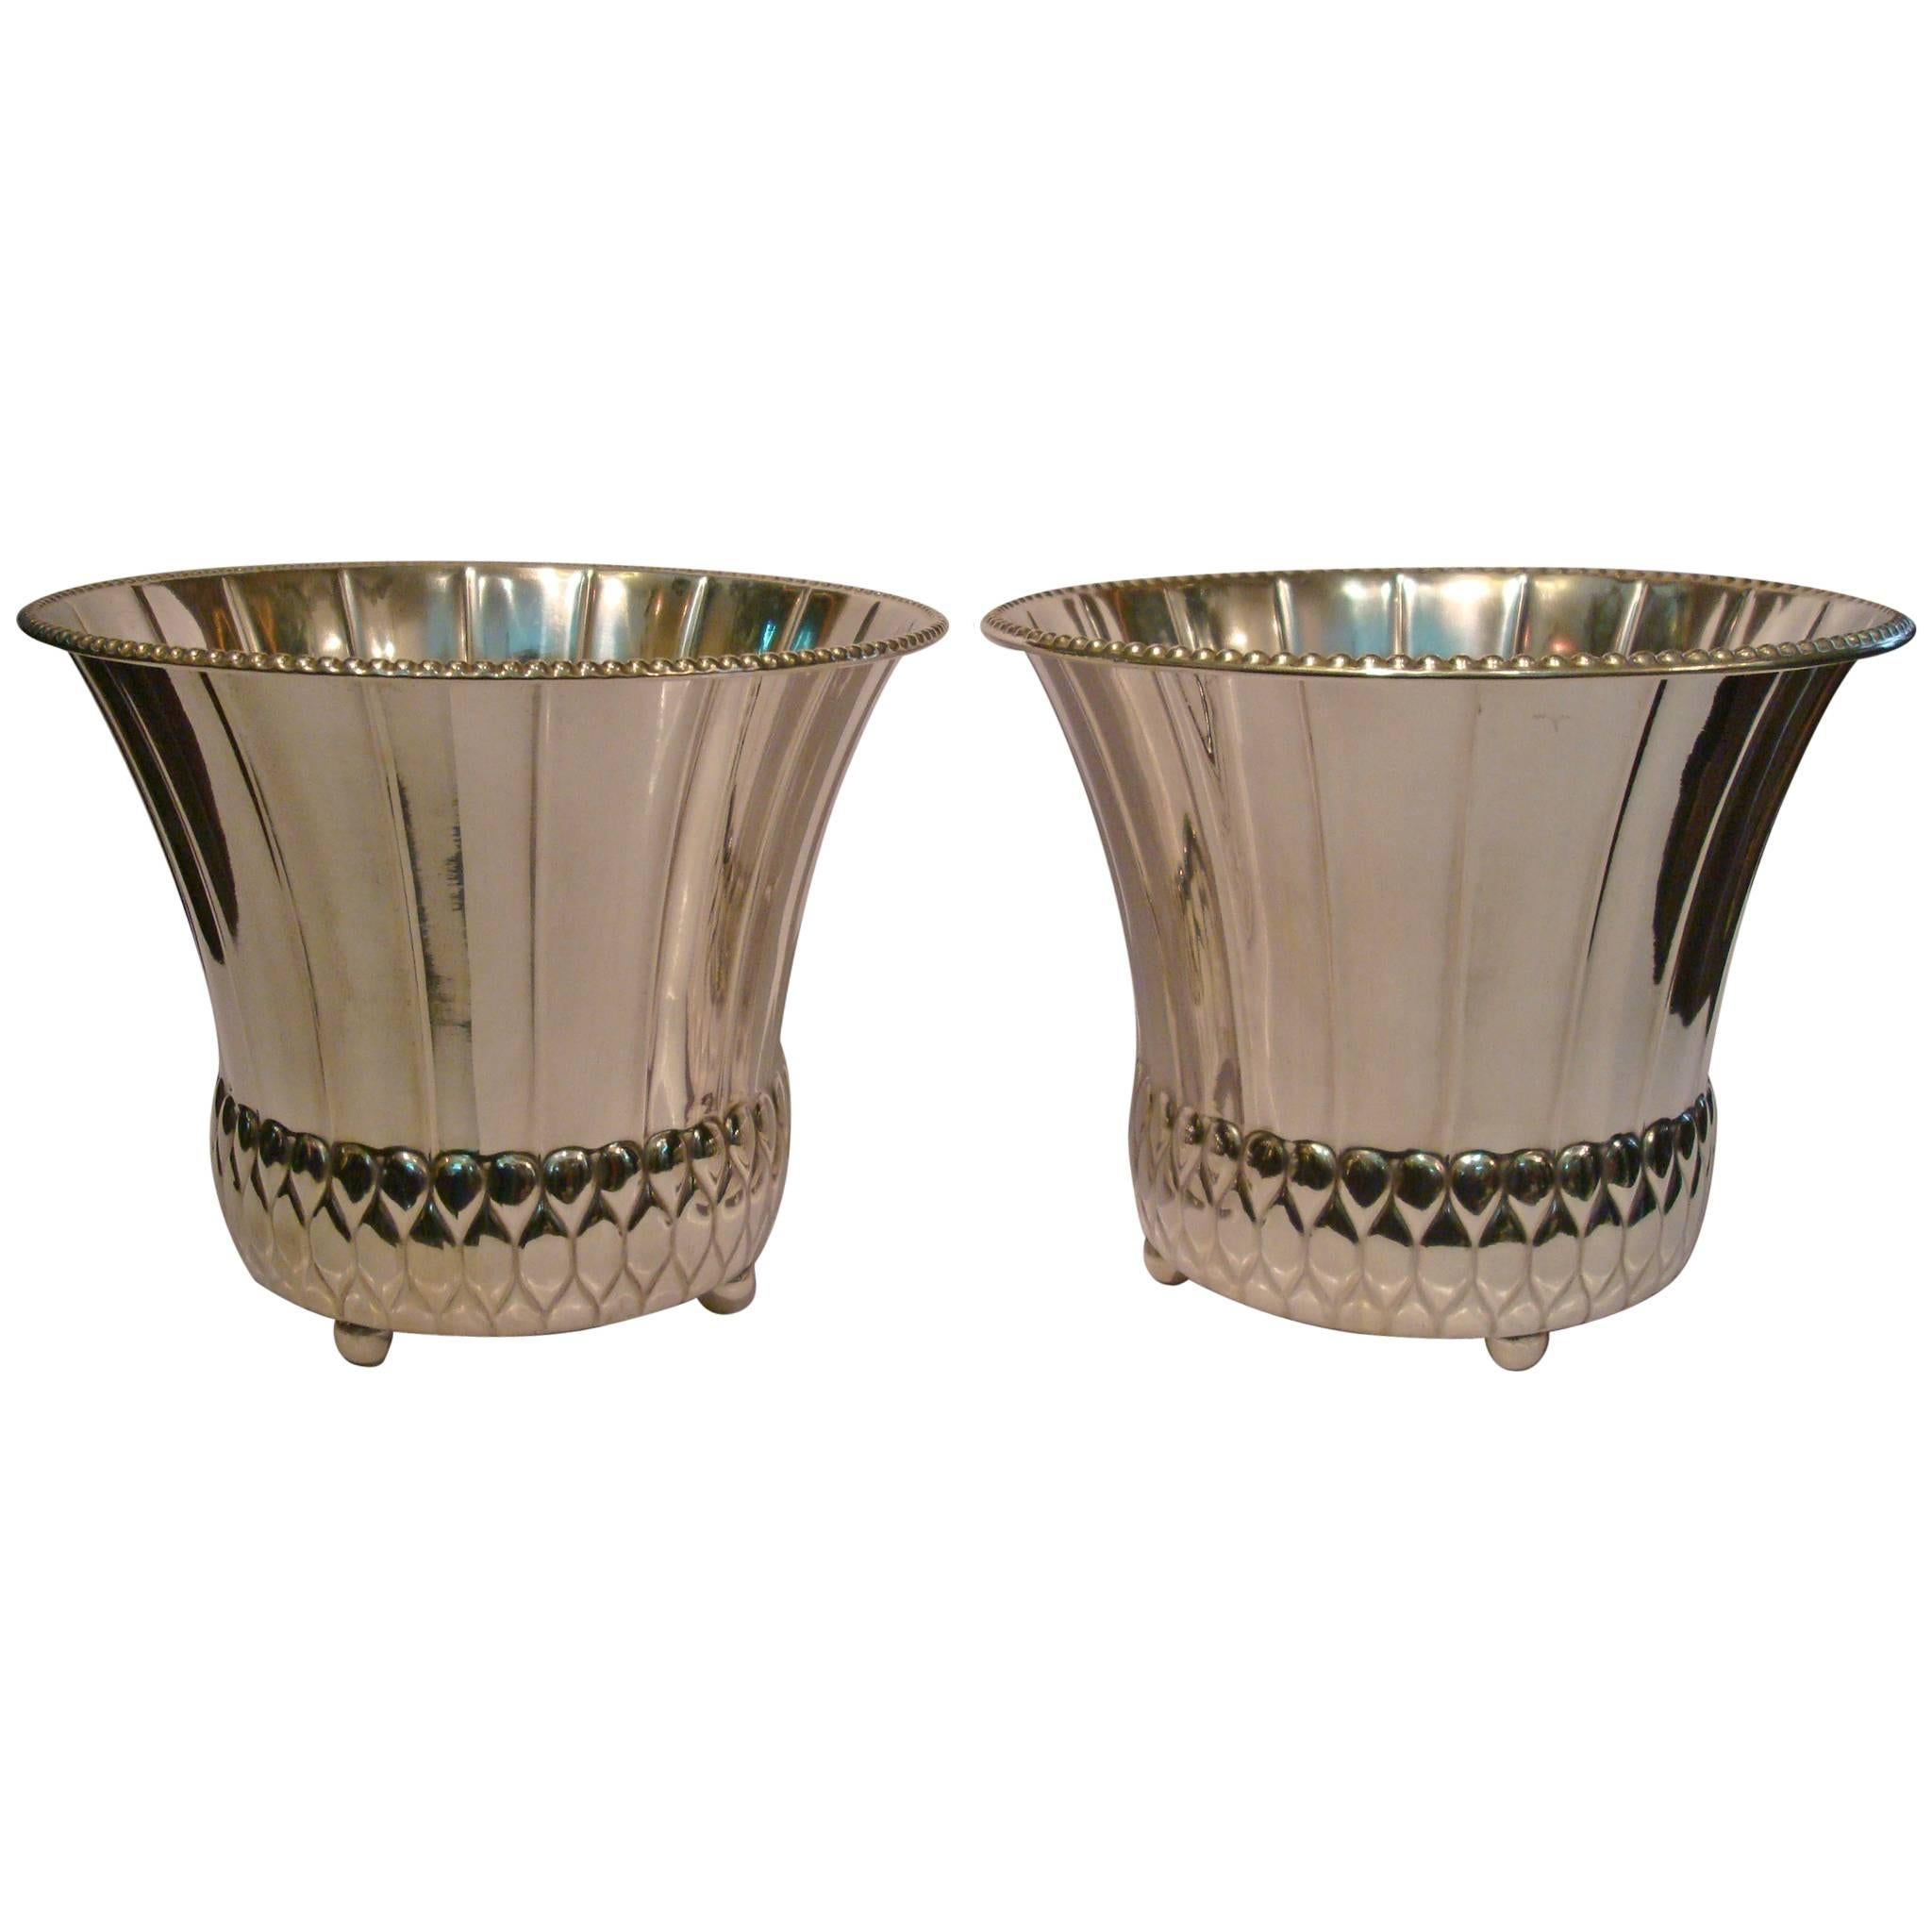 Pair of Art Deco Planters Silver Plated Brass, Germany, 1920